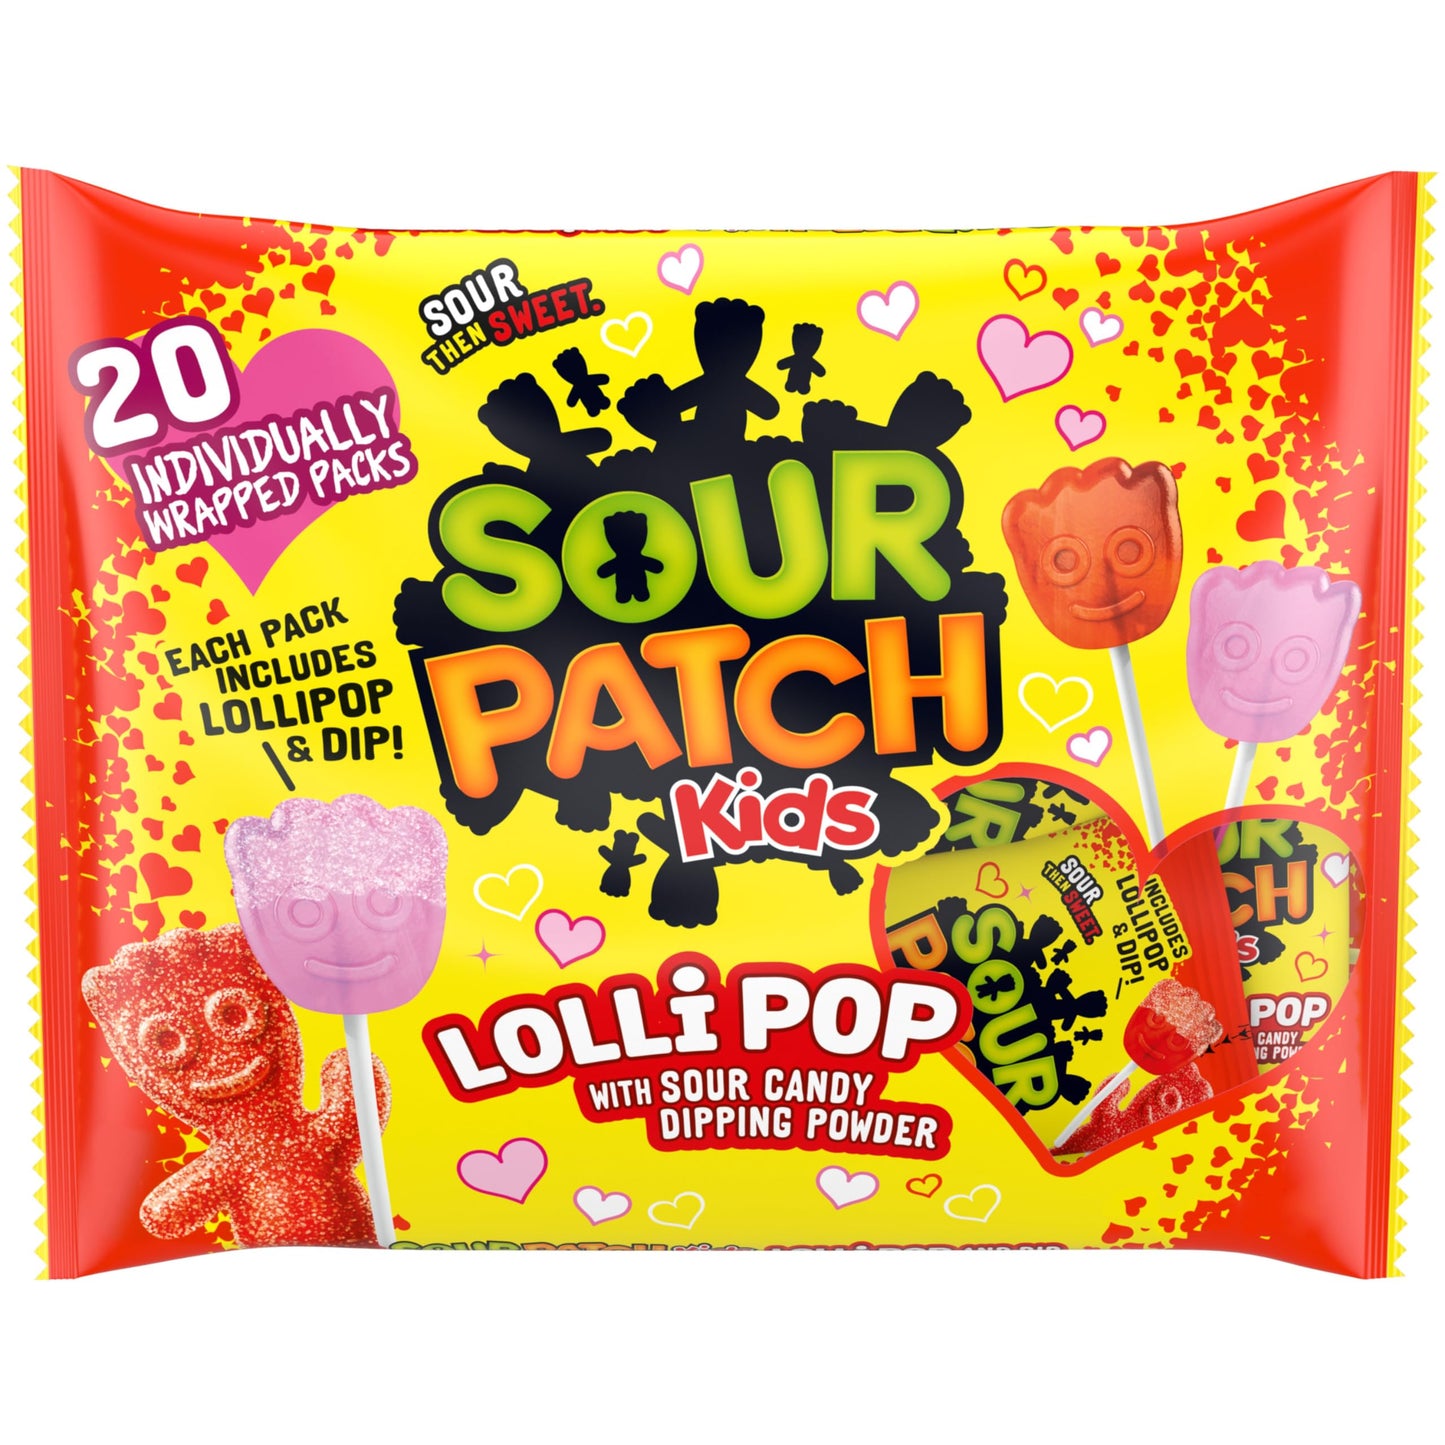 Sour Patch Kids Lollipop with Sour Candy Dipping Powder - Full Bag of 20 Lollipops